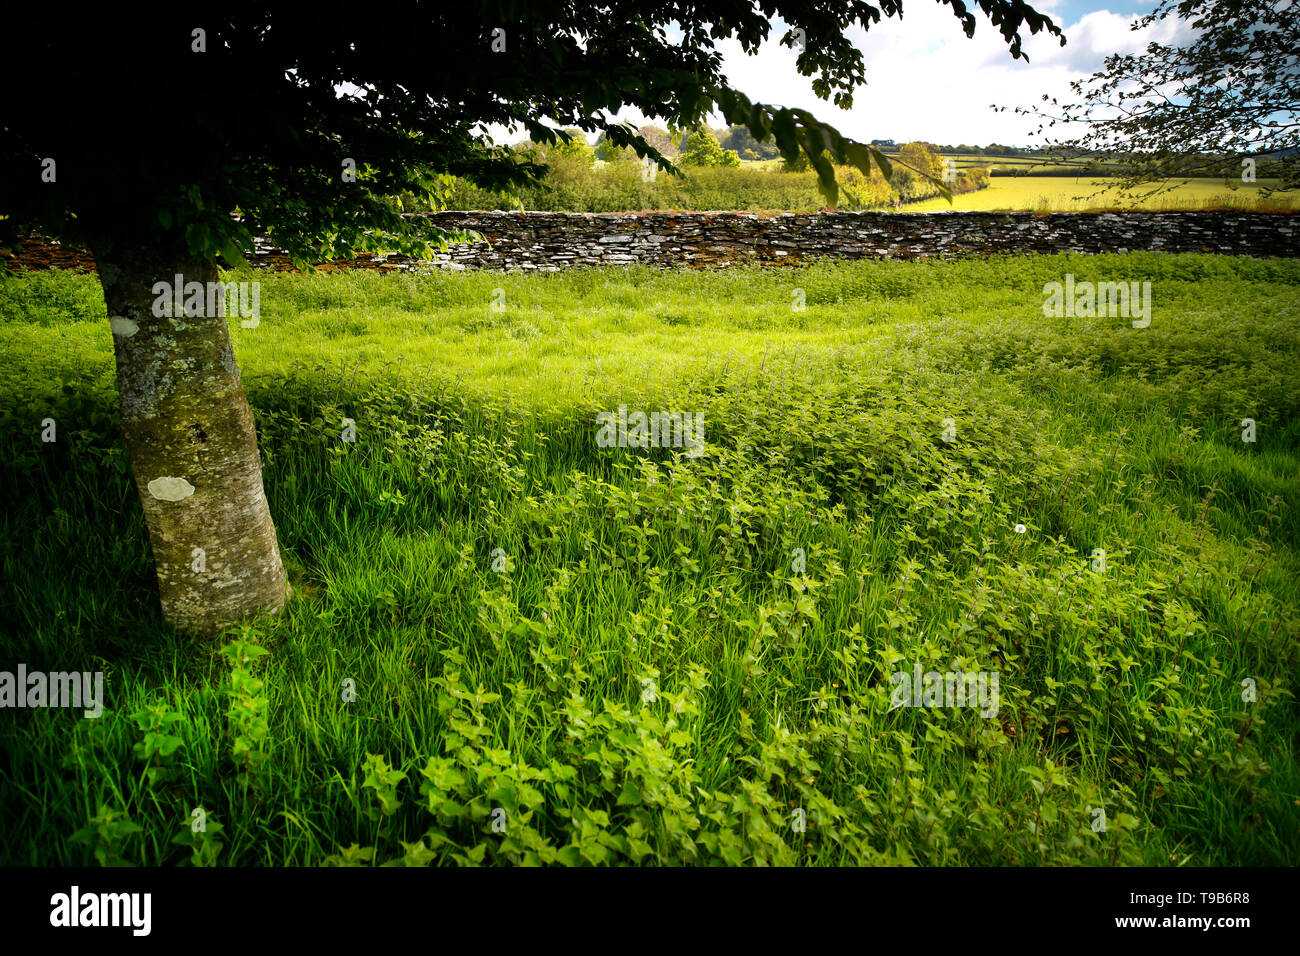 Countryside in Devon, UK, showing grass, nettles and dry stone wall. Stock Photo